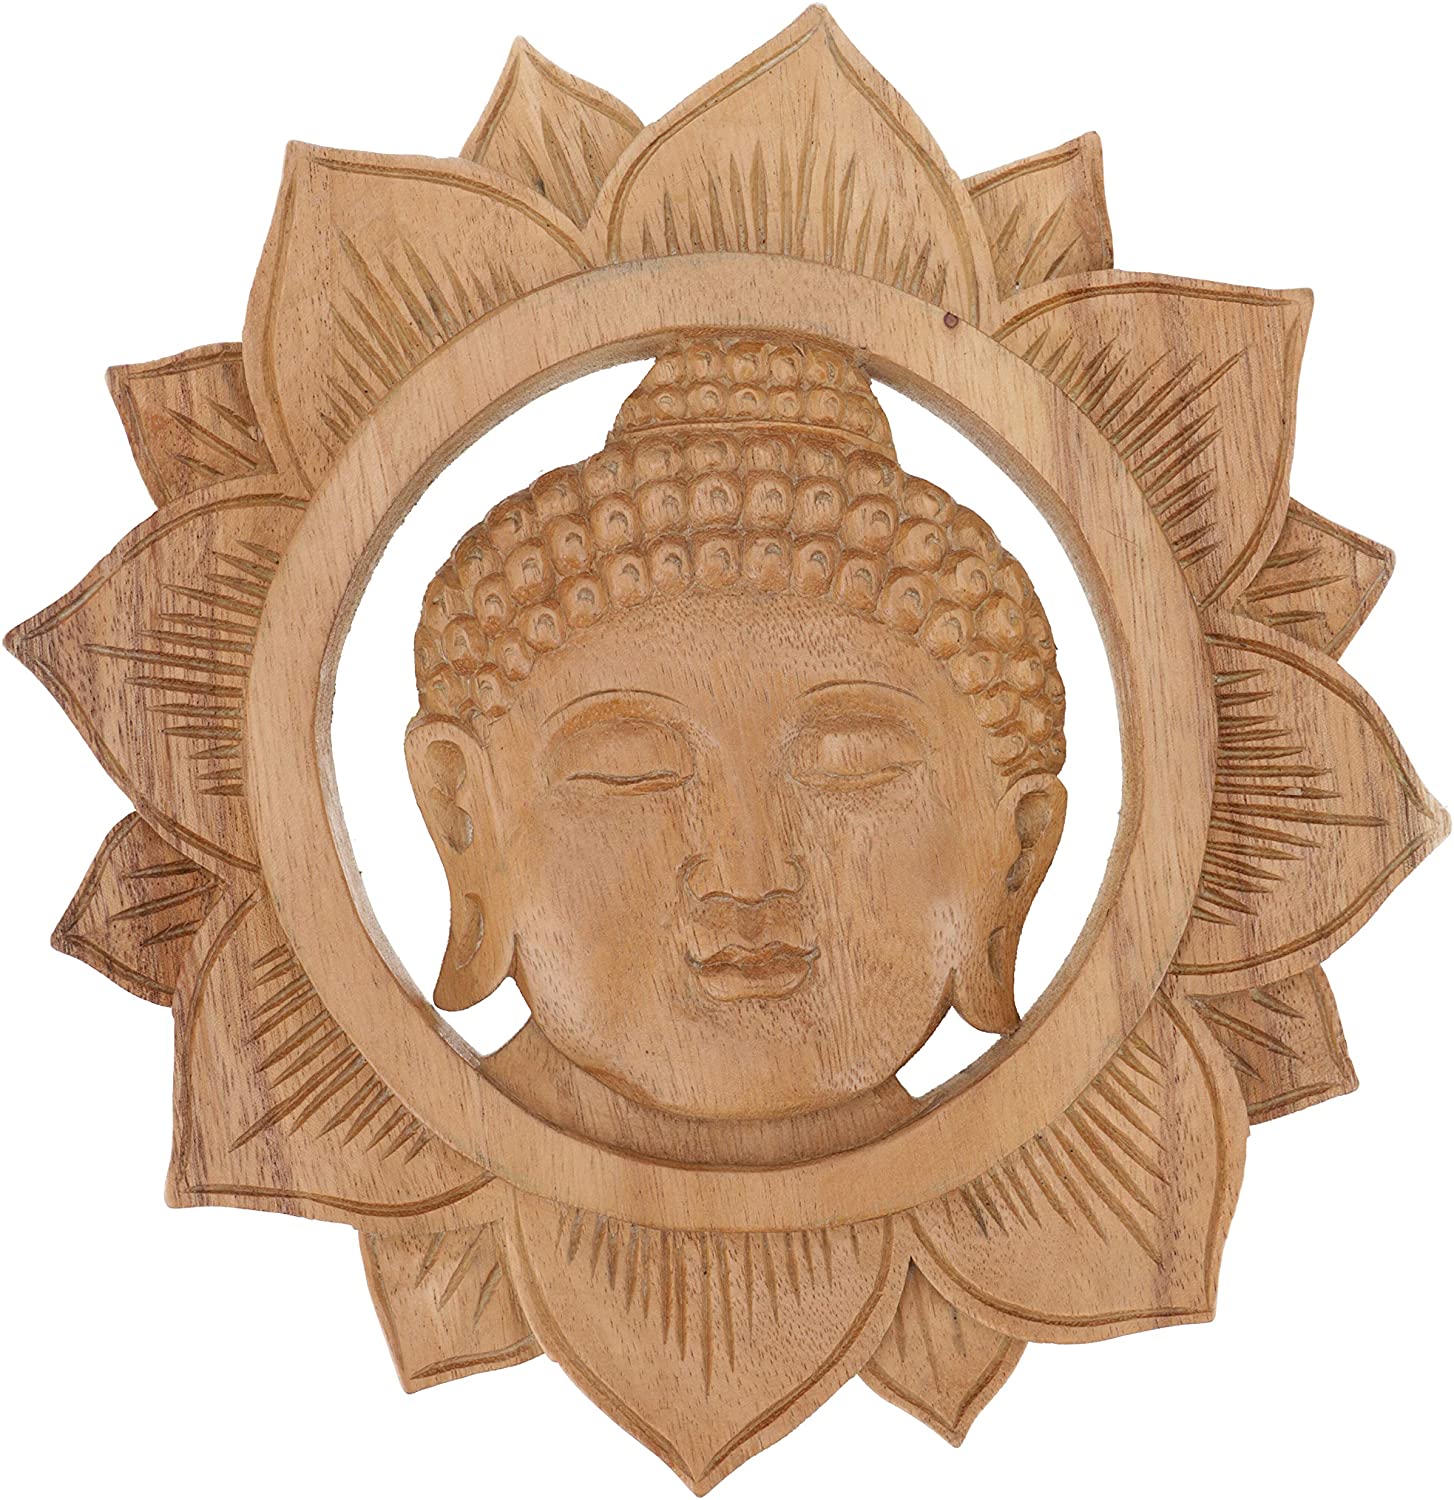 GURU SHOP Carved Wall Picture Decorative Wall Relief Buddha Head Brown 25 x 25 x 2 cm Masks & Wall Decoration